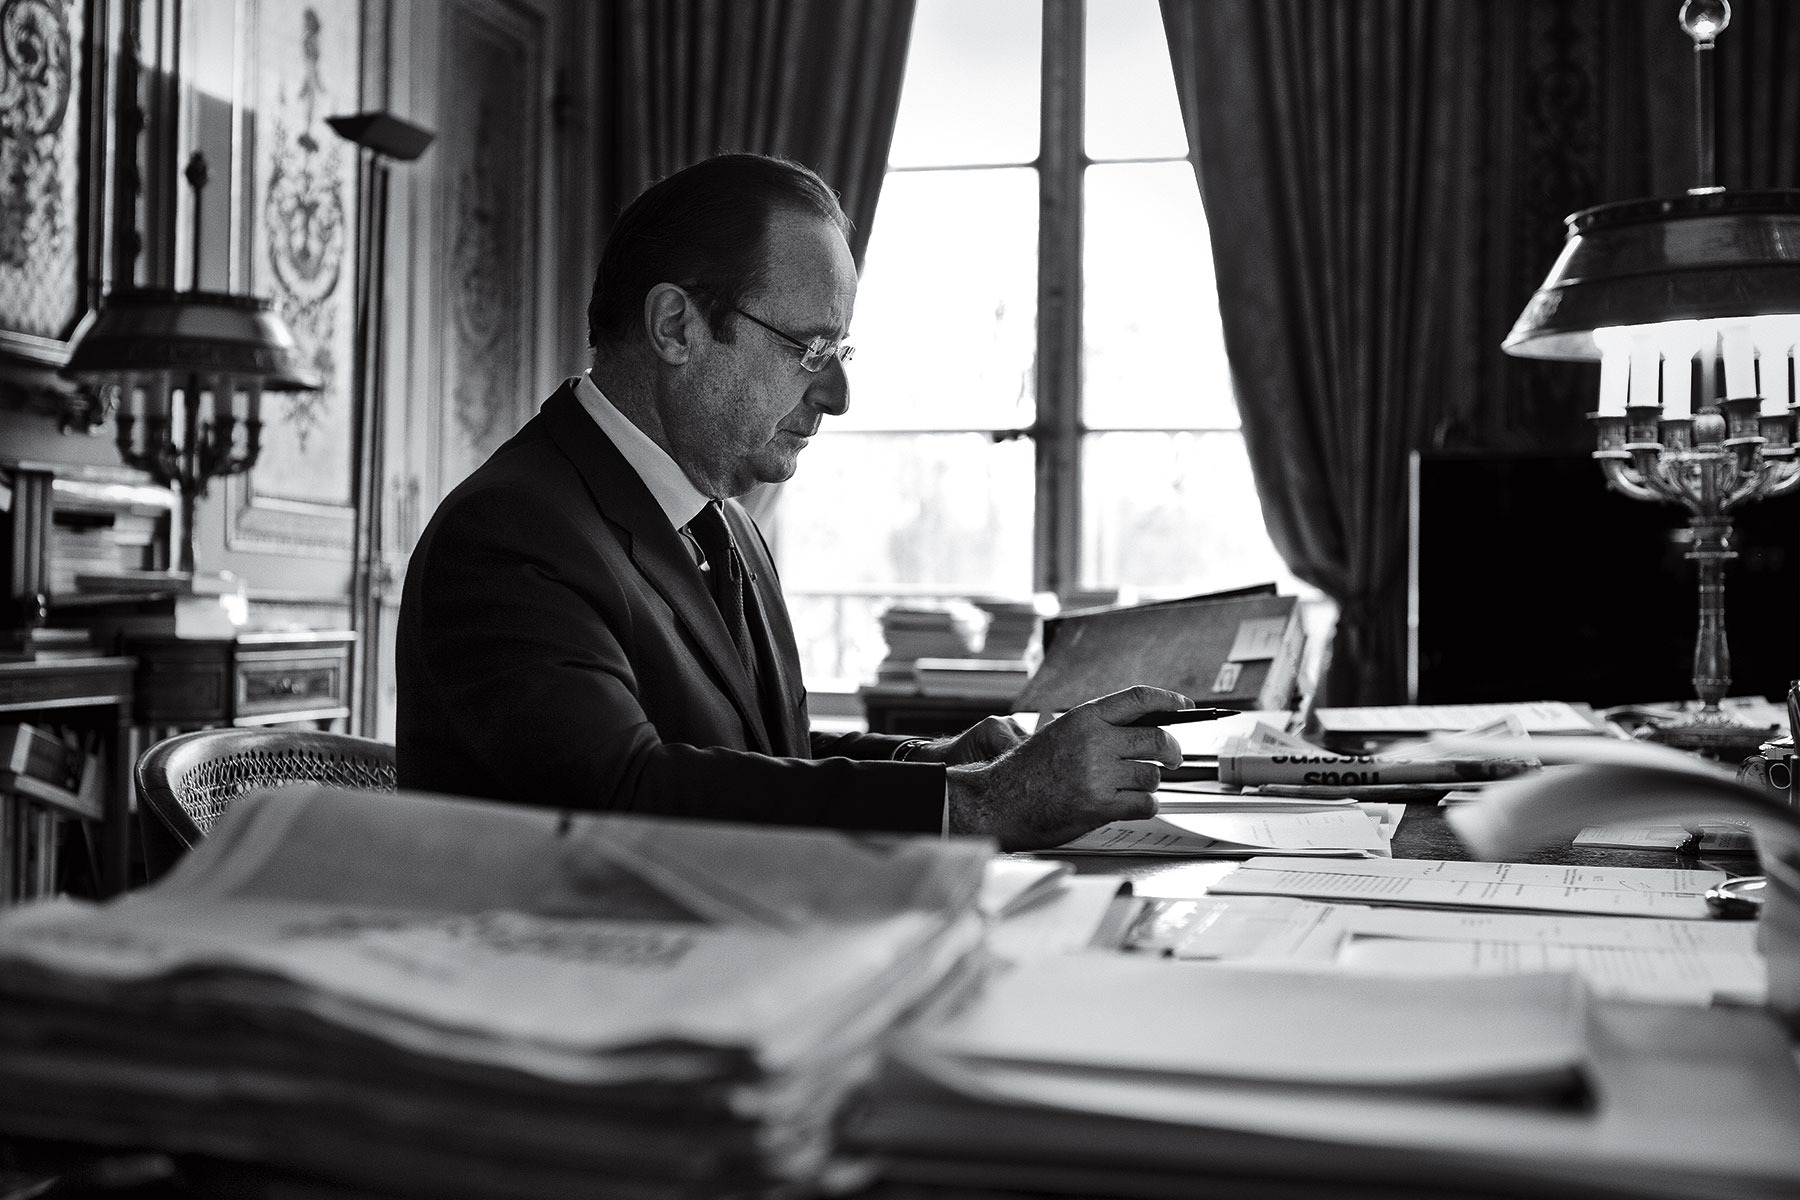 French President Hollande at work in his Élysée Palace office